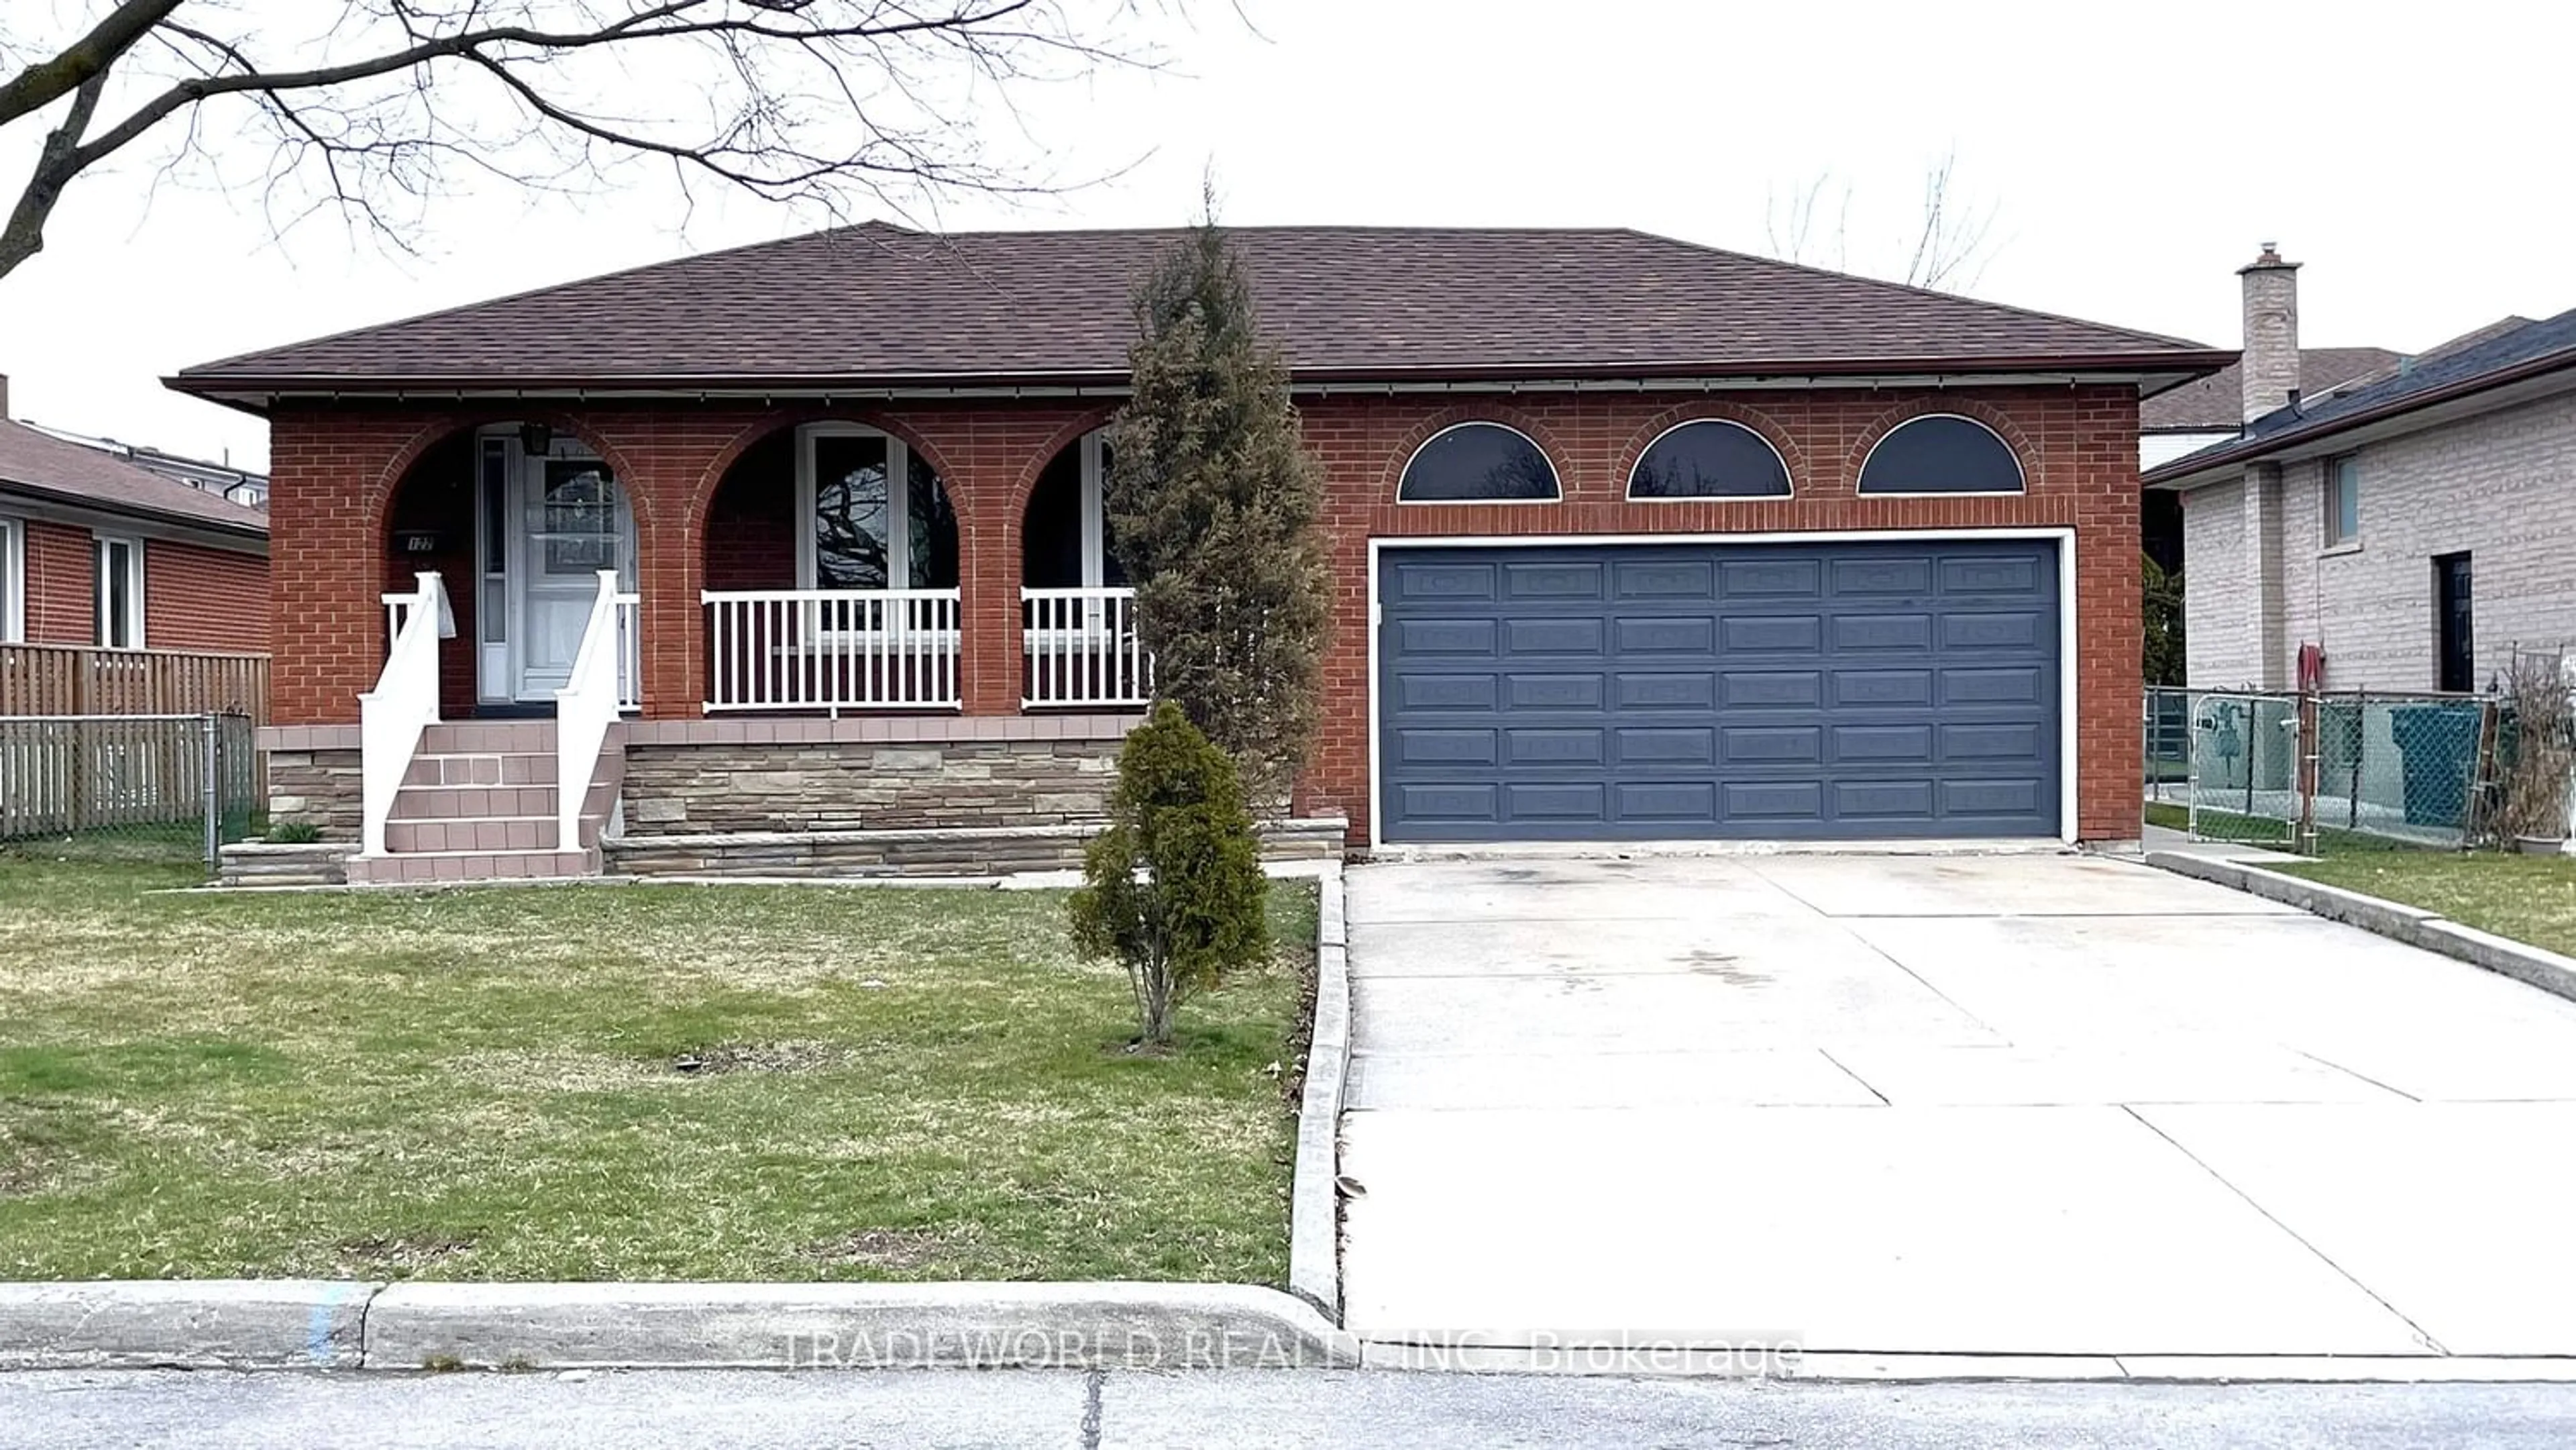 Home with brick exterior material for 122 Honeywood Rd #1349000, Toronto Ontario M3N 1B4